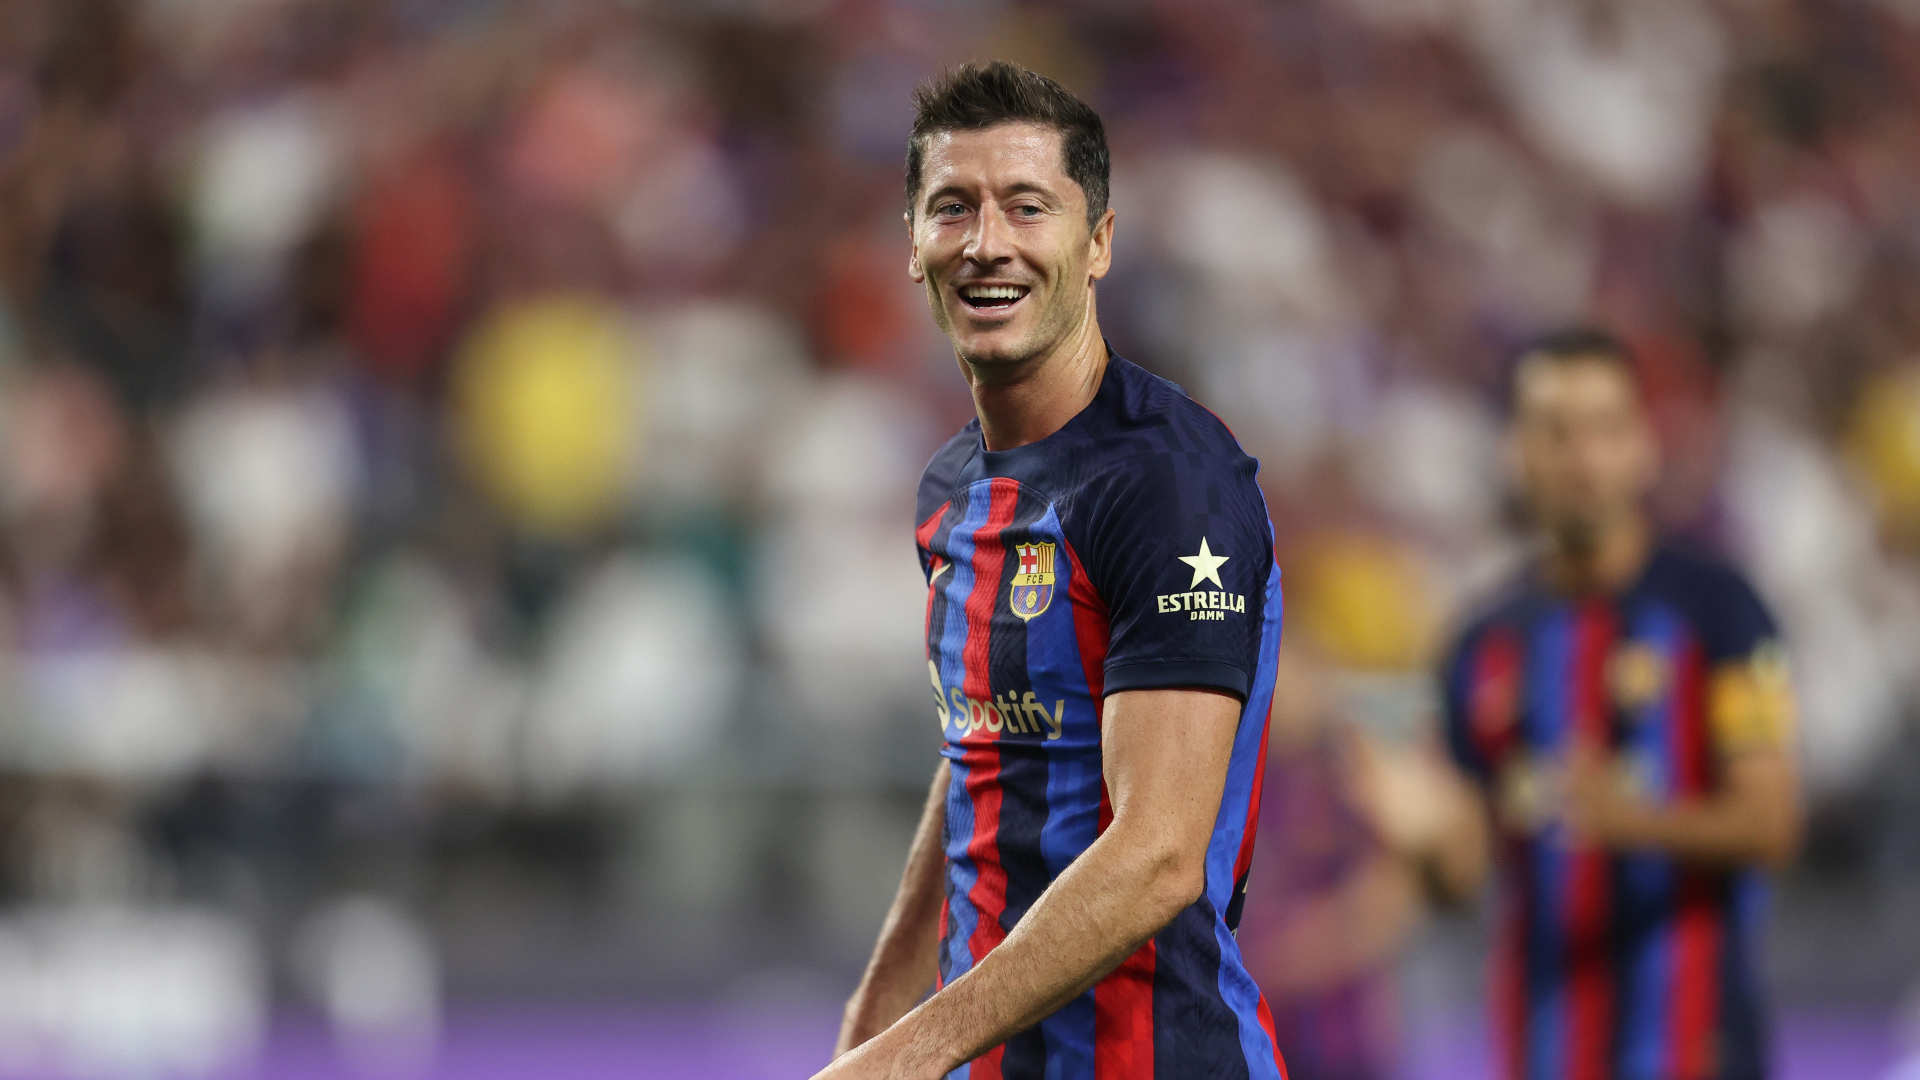 Lewandowski feels like he has been at Barcelona 'for months' after making debut in Clasico win